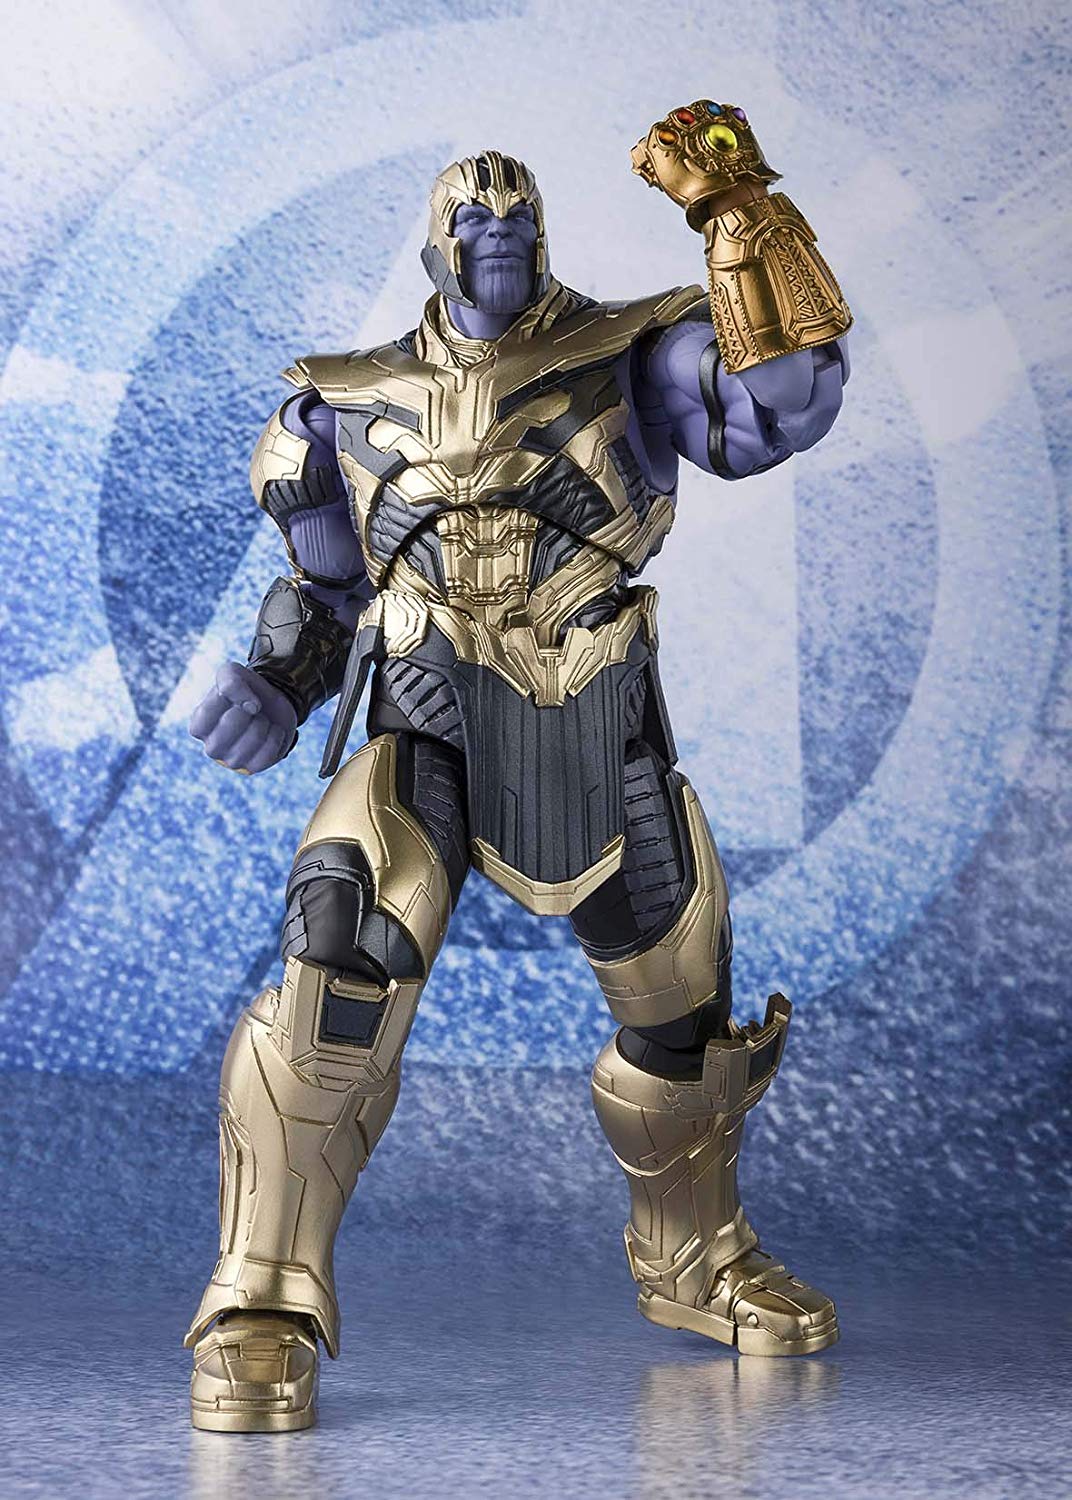 S.H.Figuart Marvel Avengers Infinity War Thanos Action Figure Collection Statue 